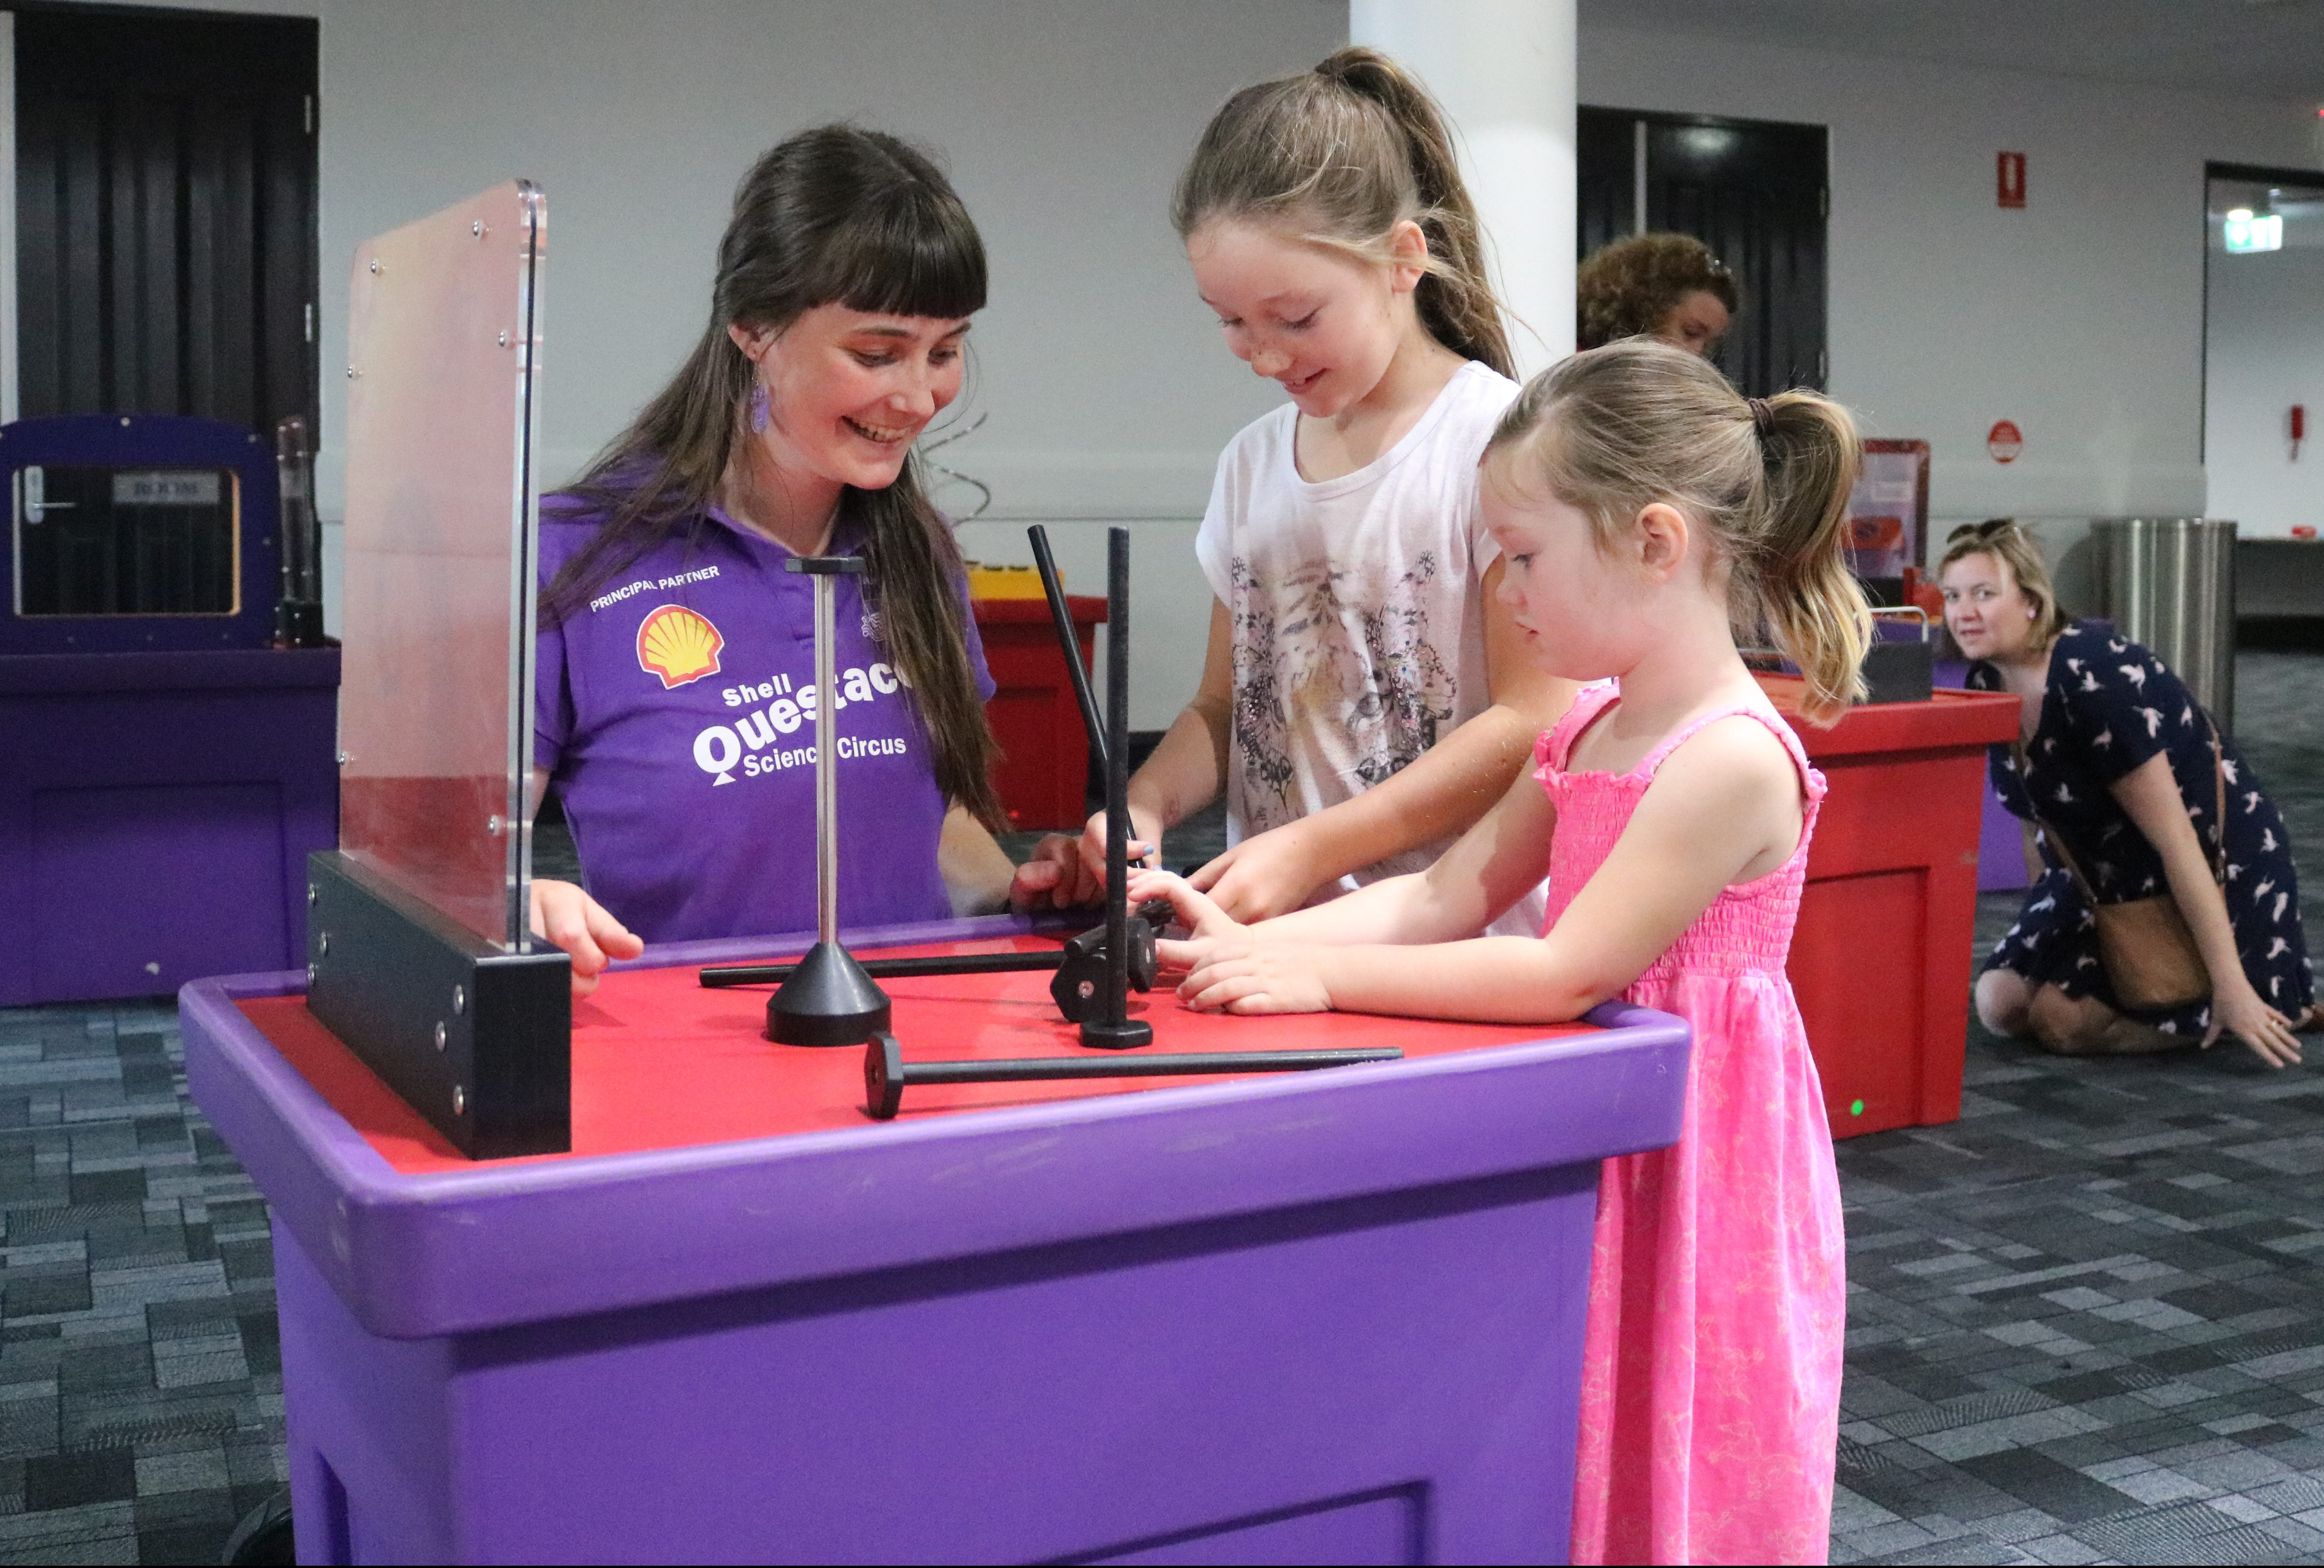 Science and fun come together at Questacon